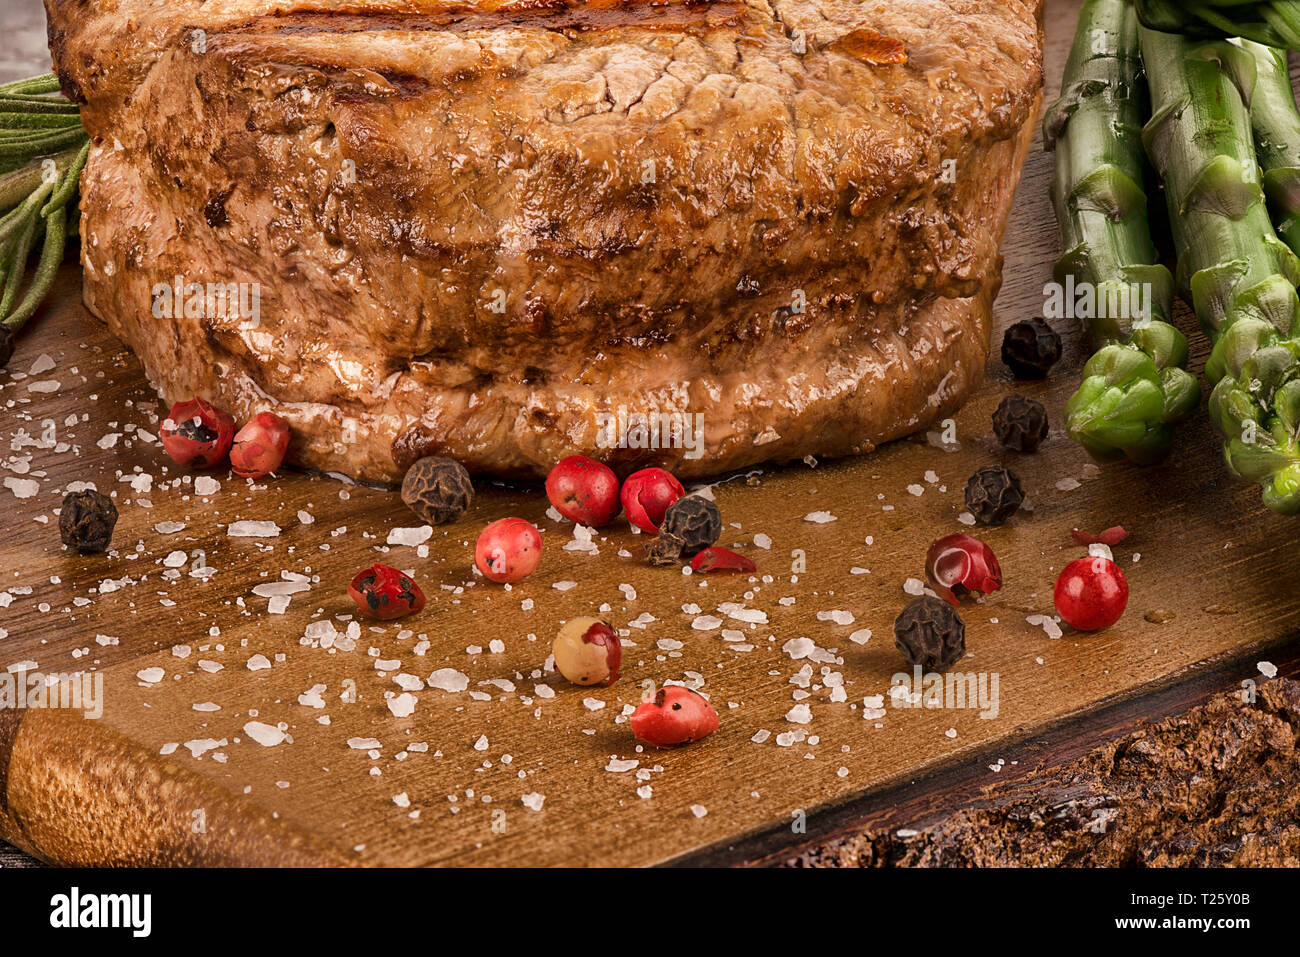 Close up on fillet mignon with asparagus on the side. Stock Photo